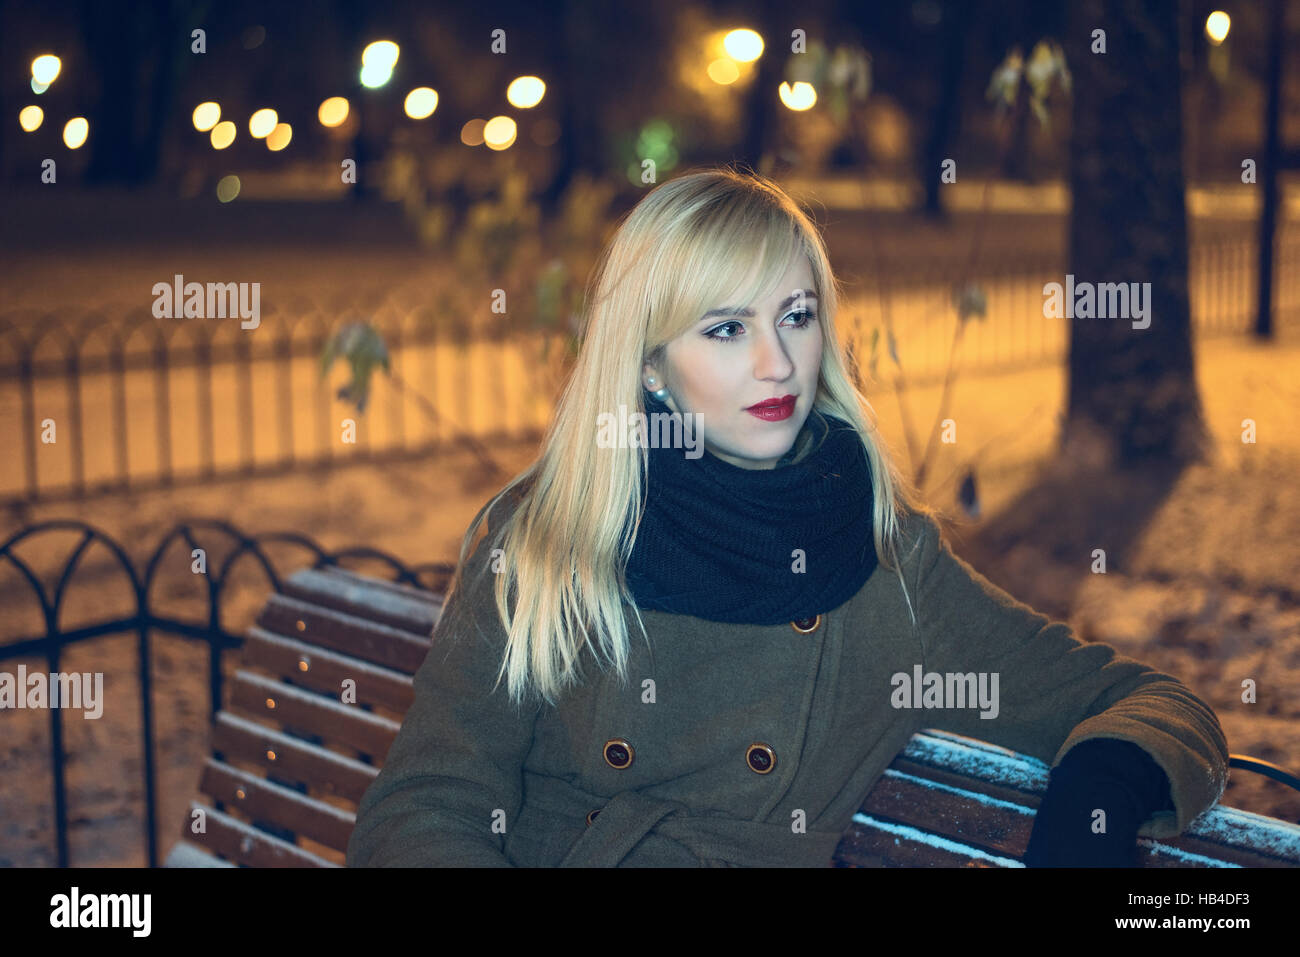 Portrait of woman in park at night Stock Photo